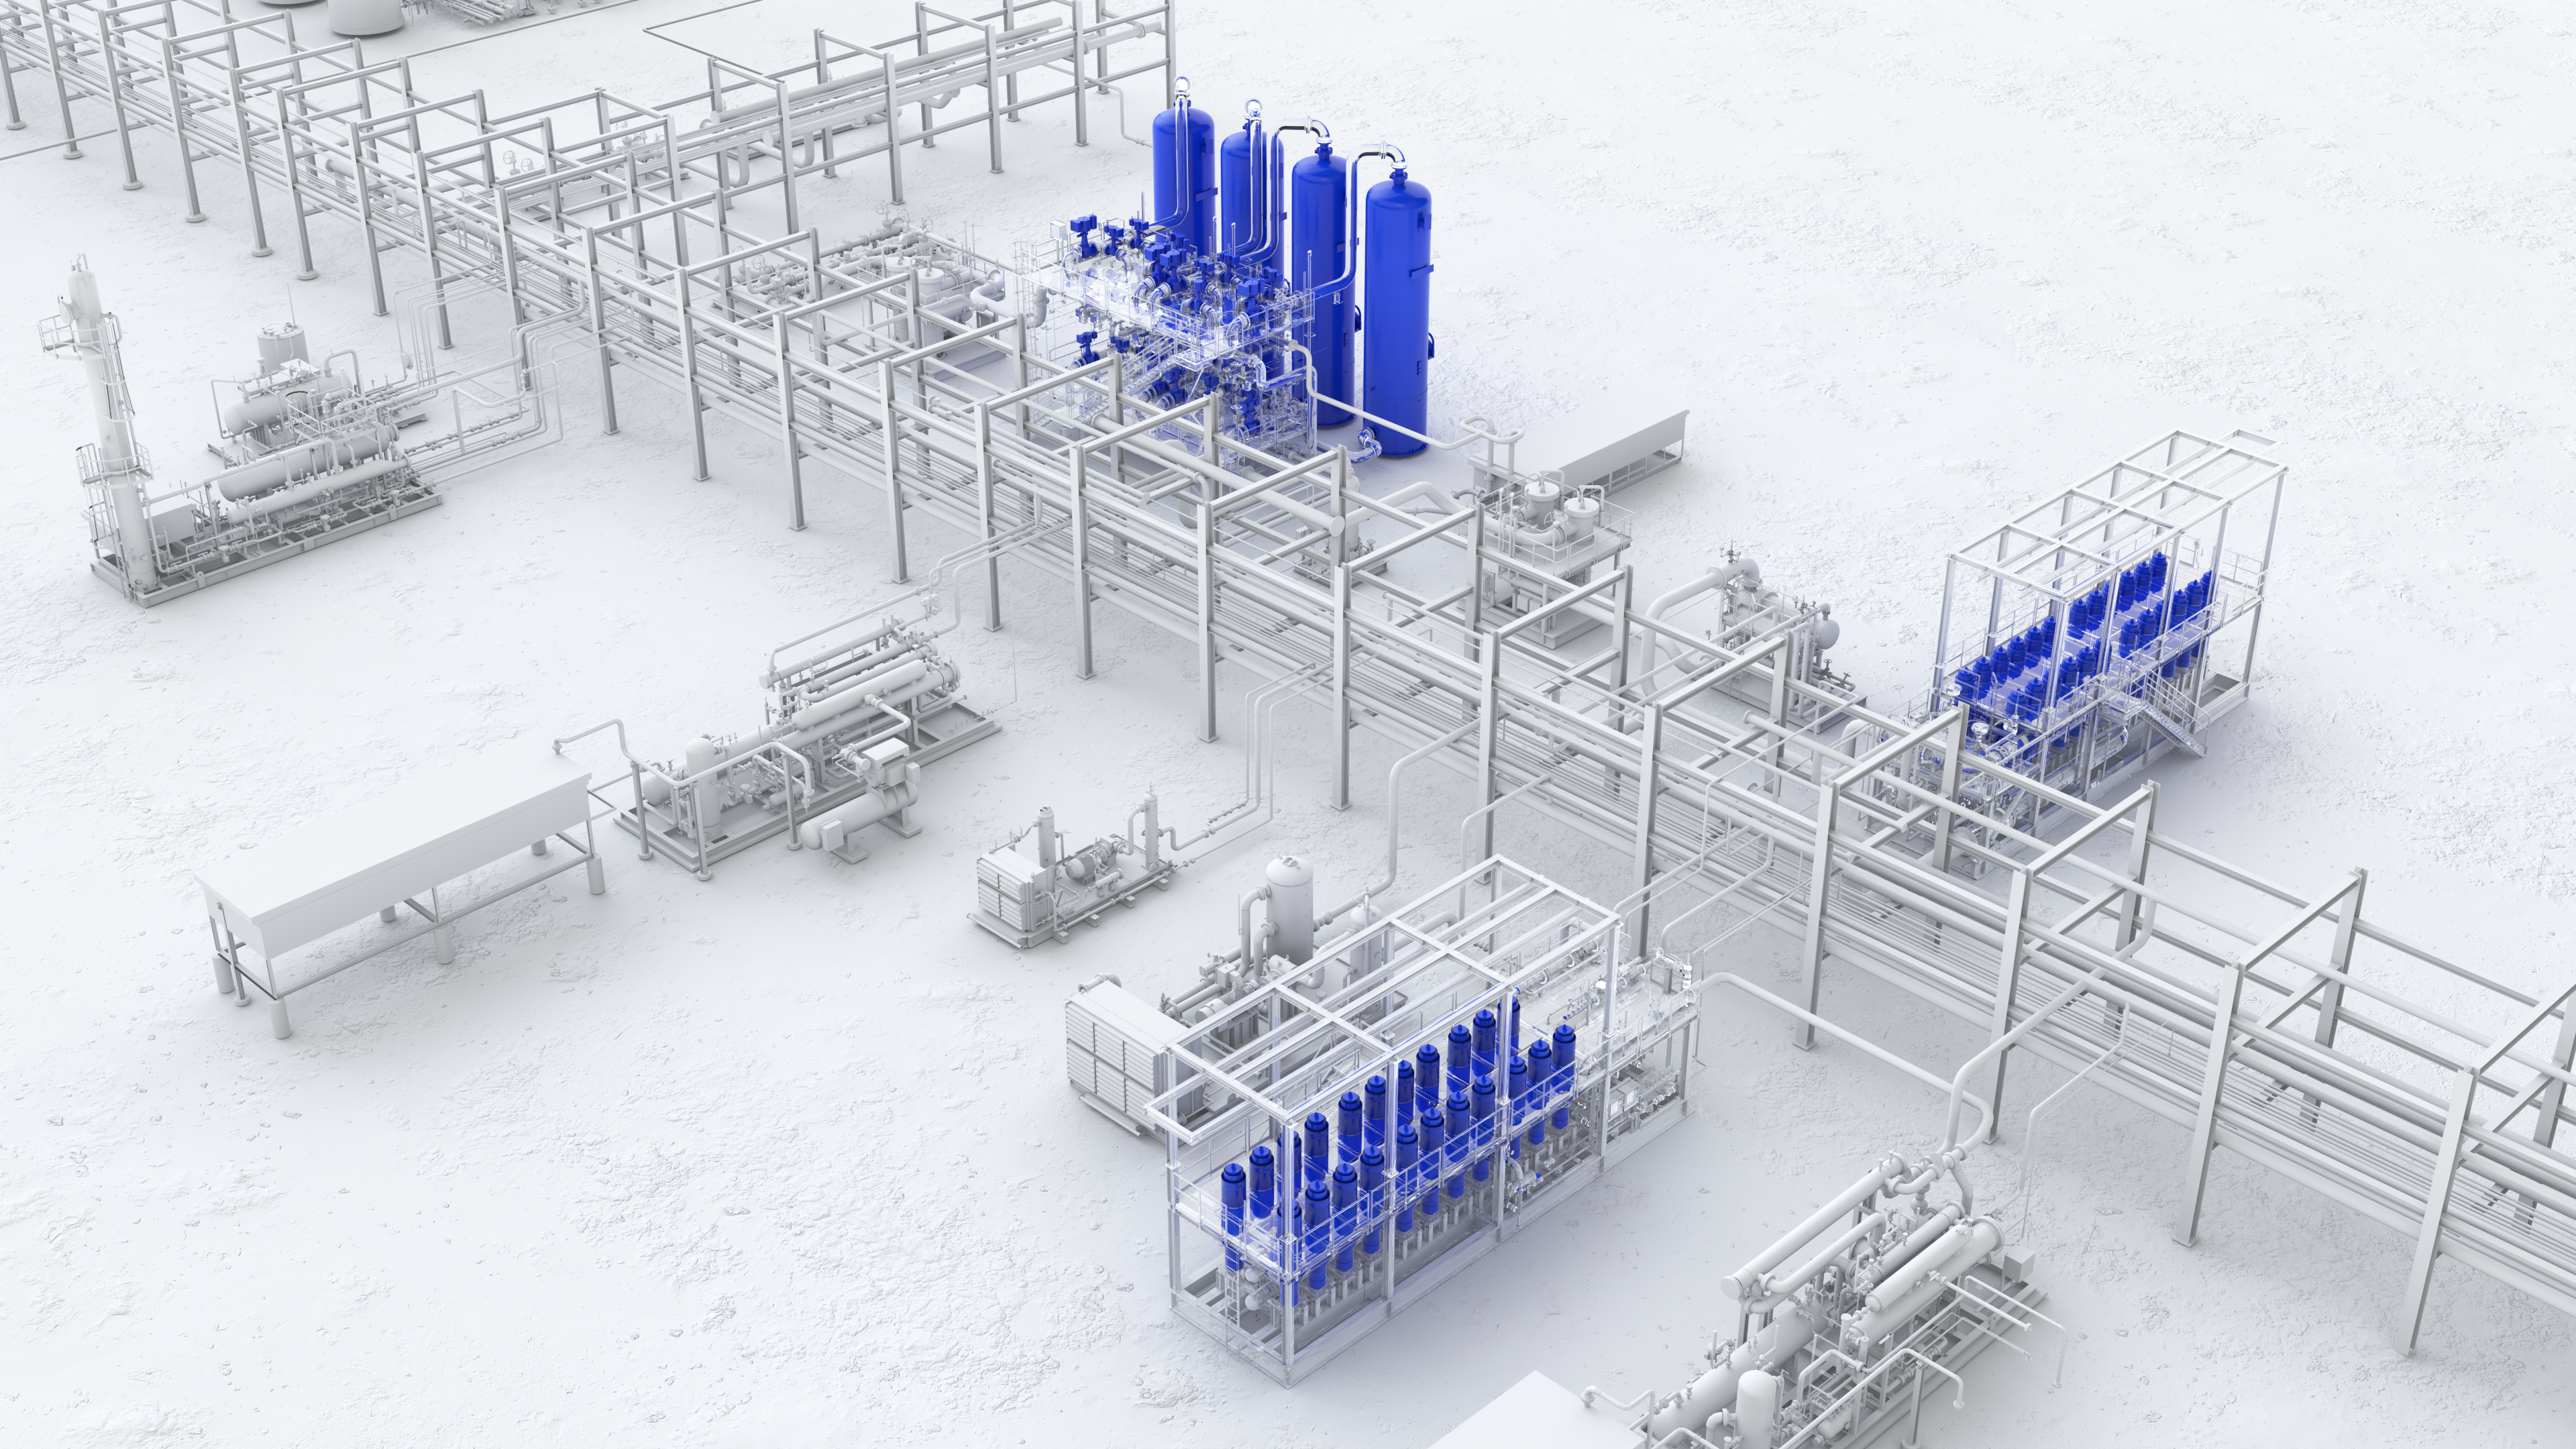 Hydrocarbon processing facility using Process Live data-enriched performance service.